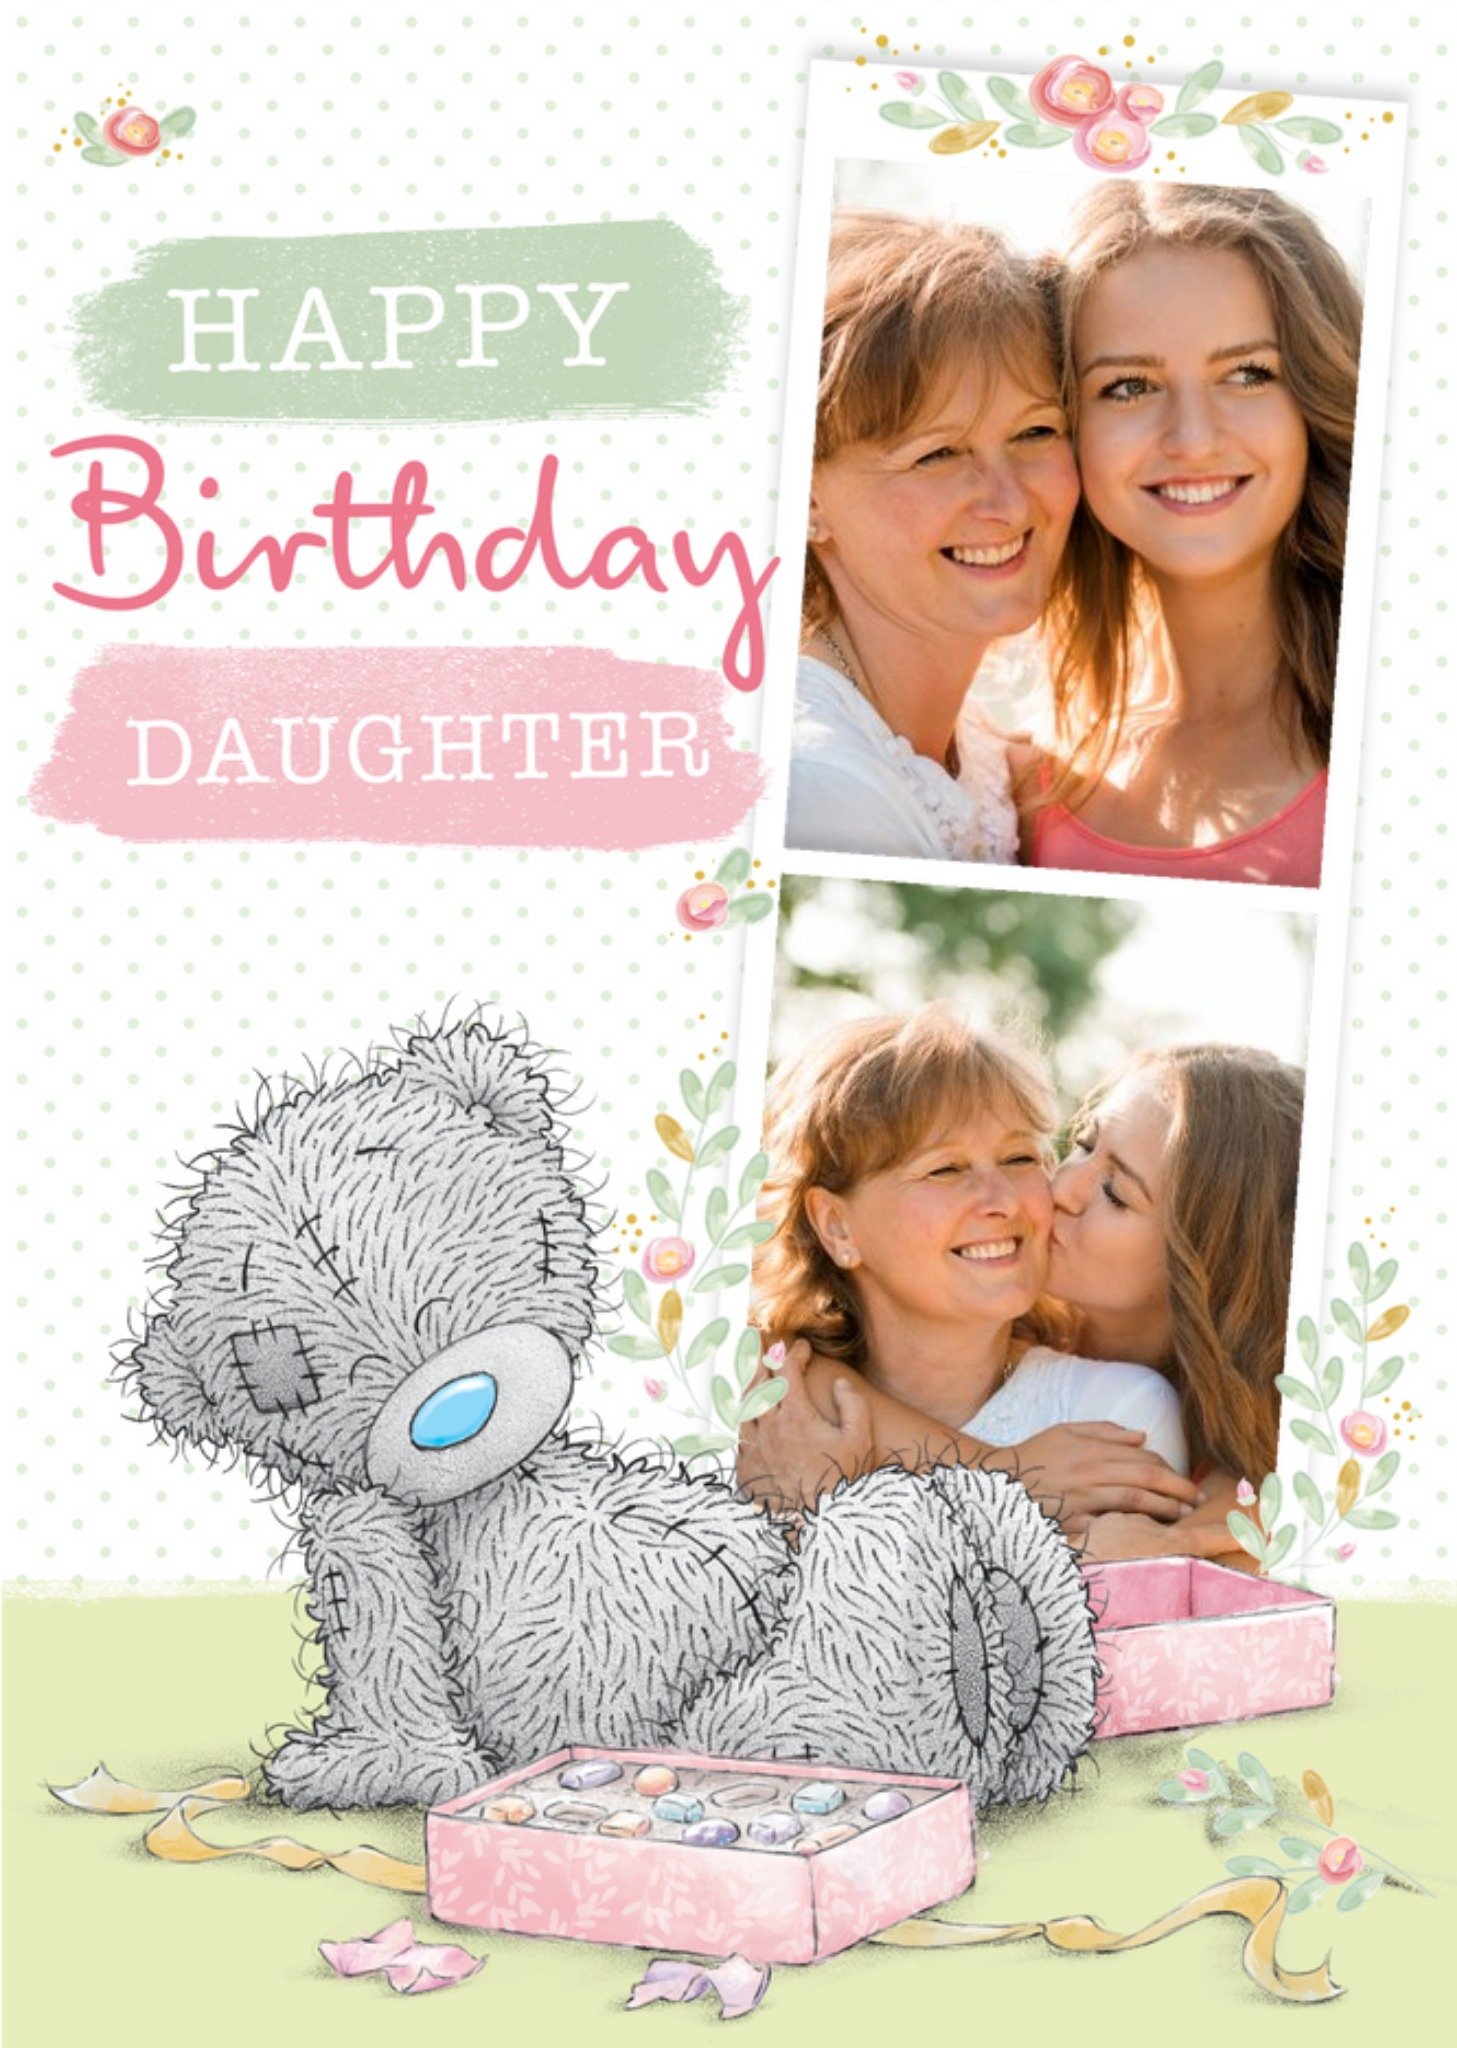 Me To You Daughter Birthday Card - Tatty Teddy - Photo Upload Card Ecard